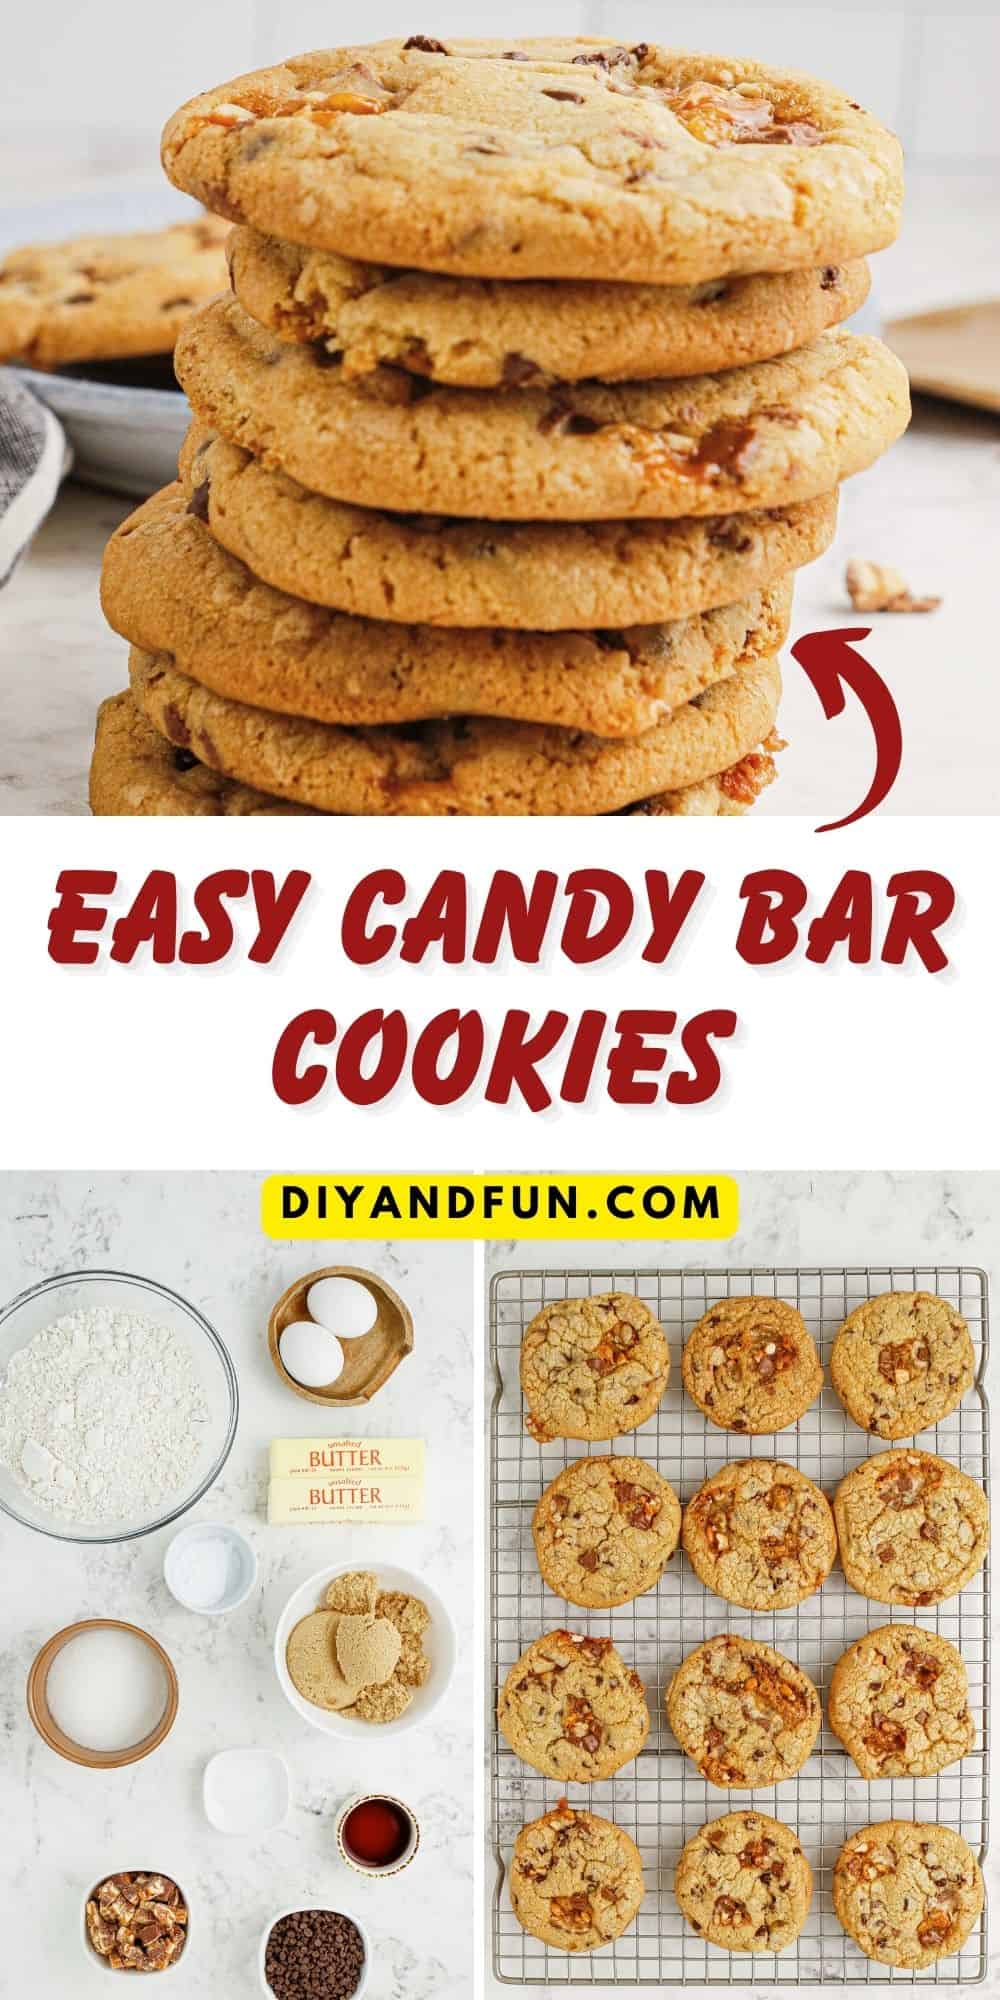 Easy Candy Bar Cookies, a delicious soft and chewy dessert or snack recipe made with chopped candy bars  in a decadent cookie.